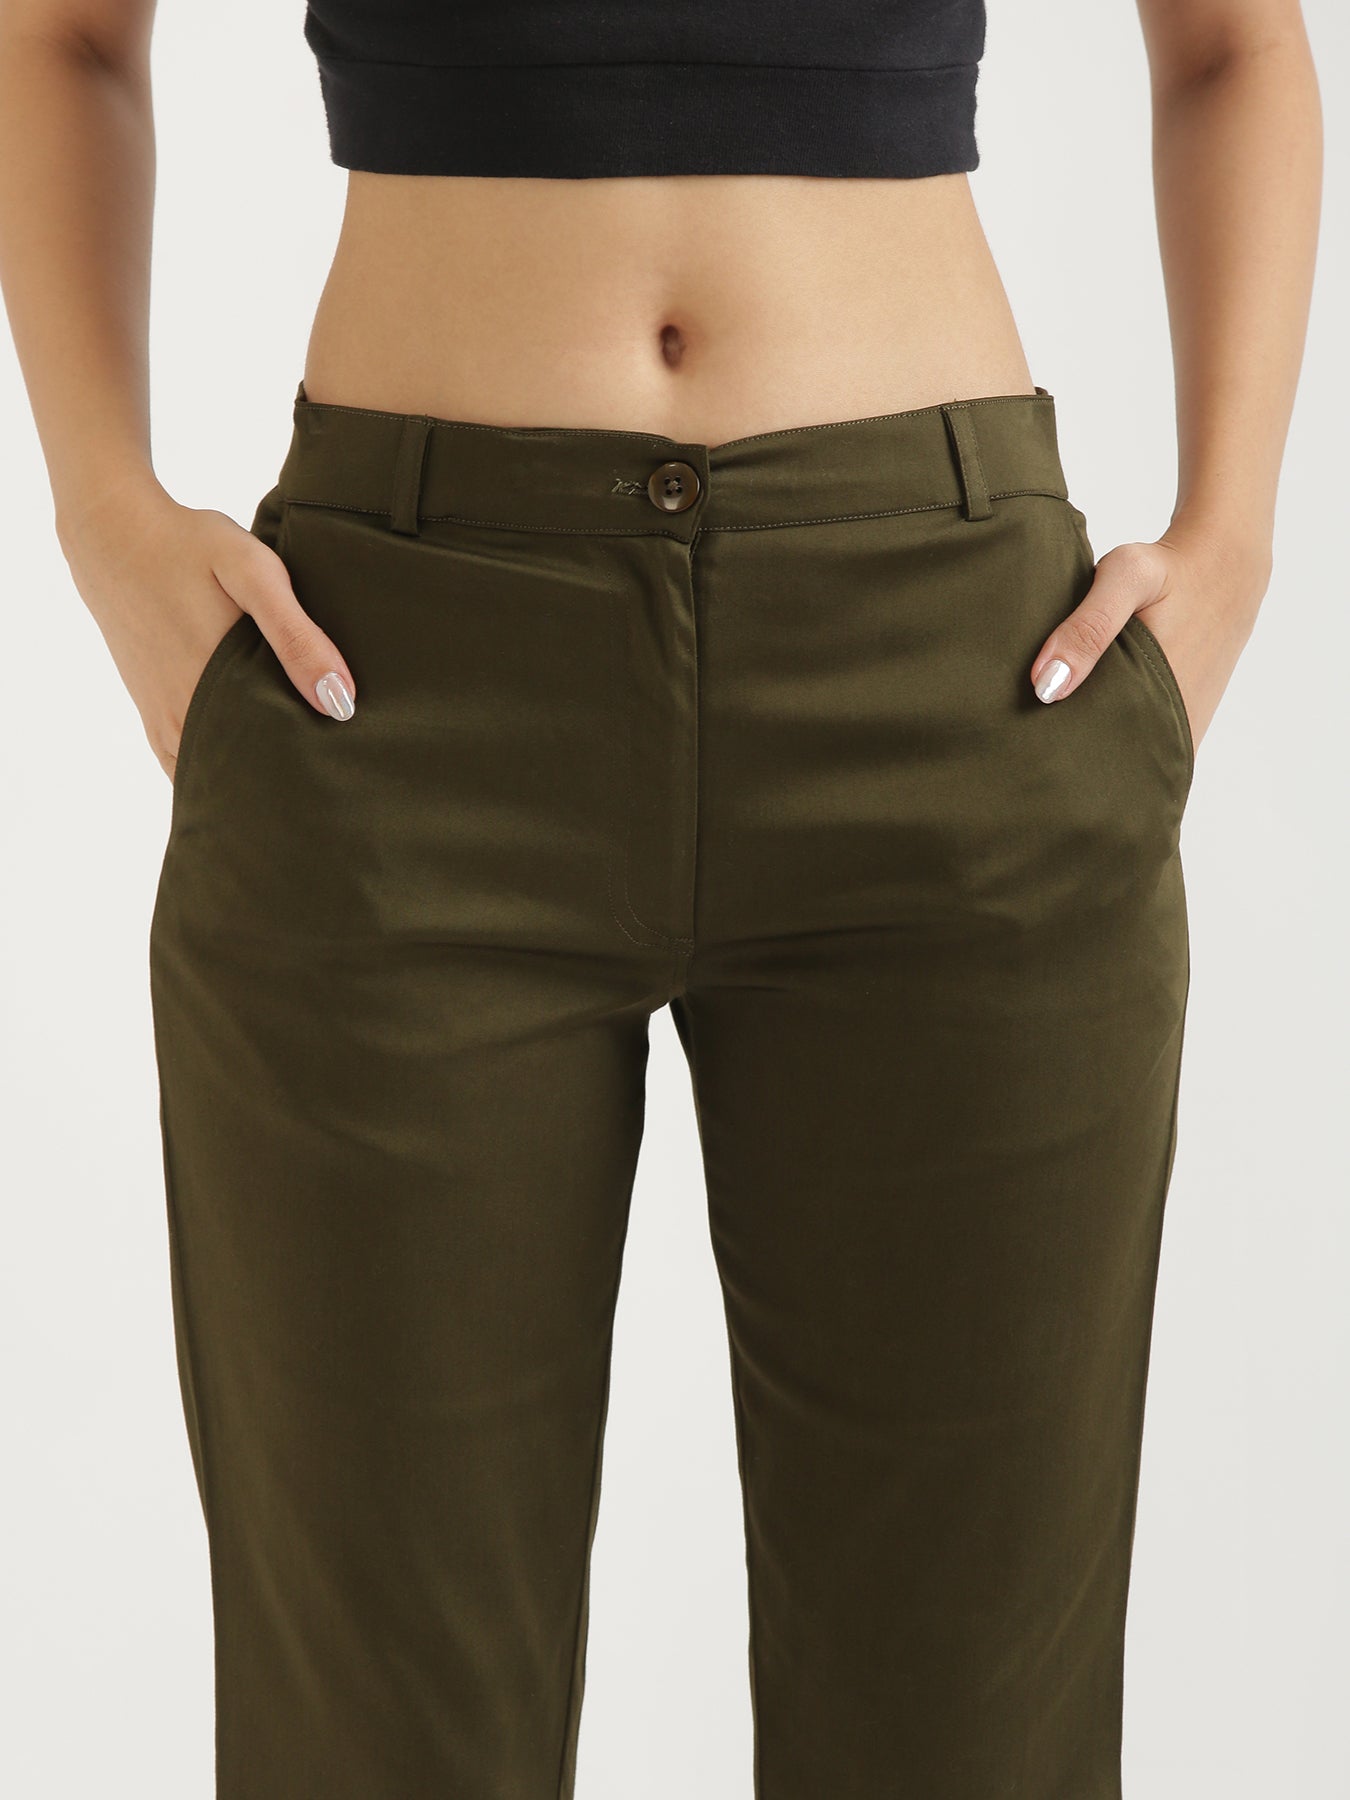 How to Wear Olive Green Pants- From Work to Weekend - Thrifty Wife Happy  Life | Olive green pants outfit, Olive green pants, Fashion outfits